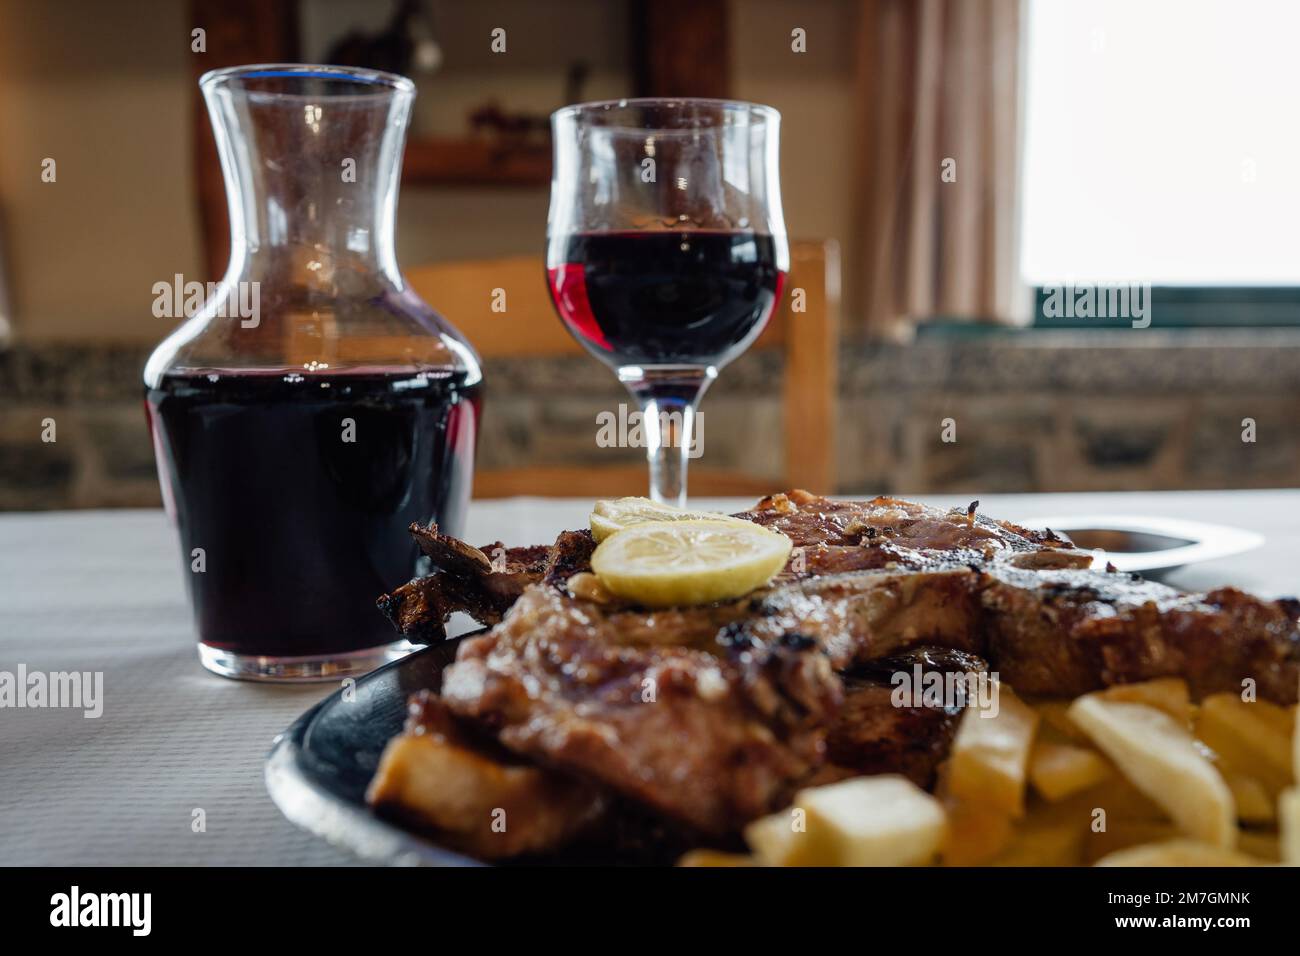 Menu food of pork chops , french fries and red wine Stock Photo